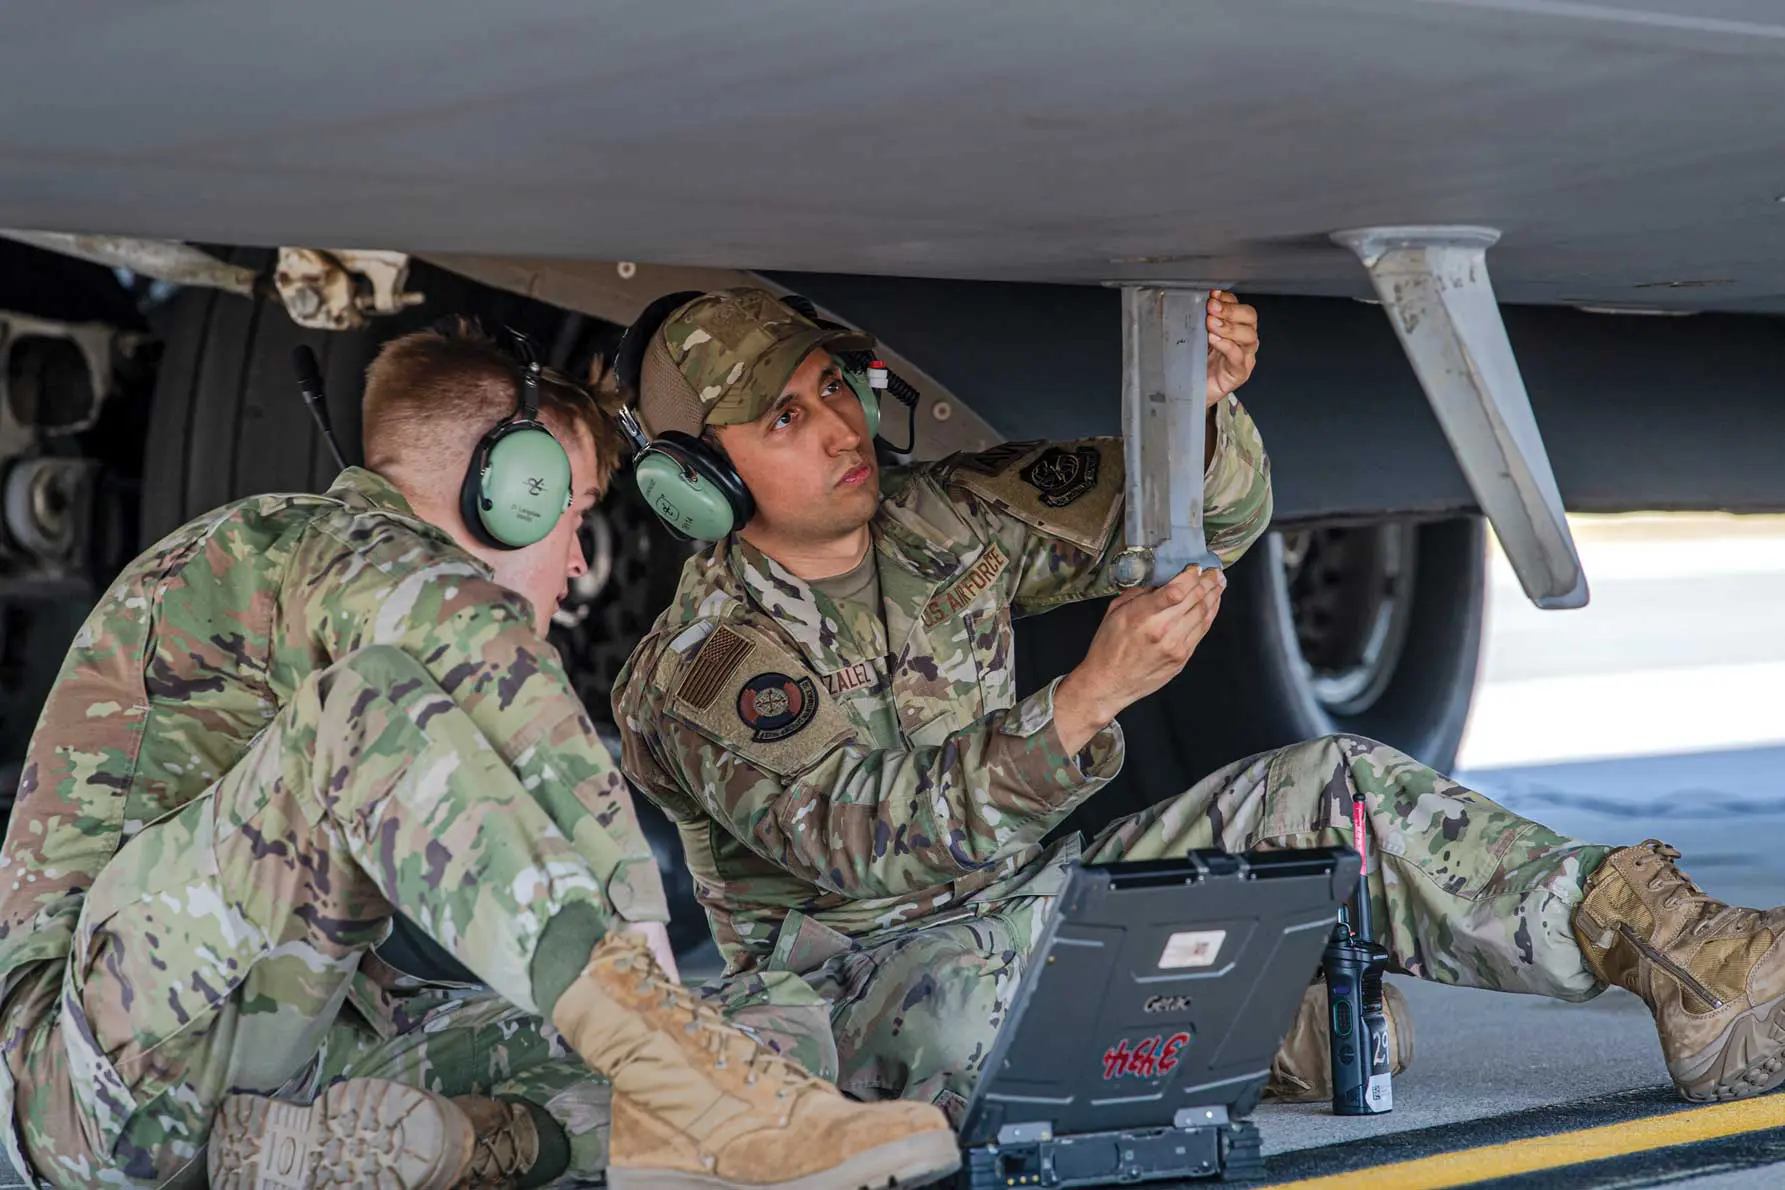 Two soldiers working on a laptop in the back of an aircraft.